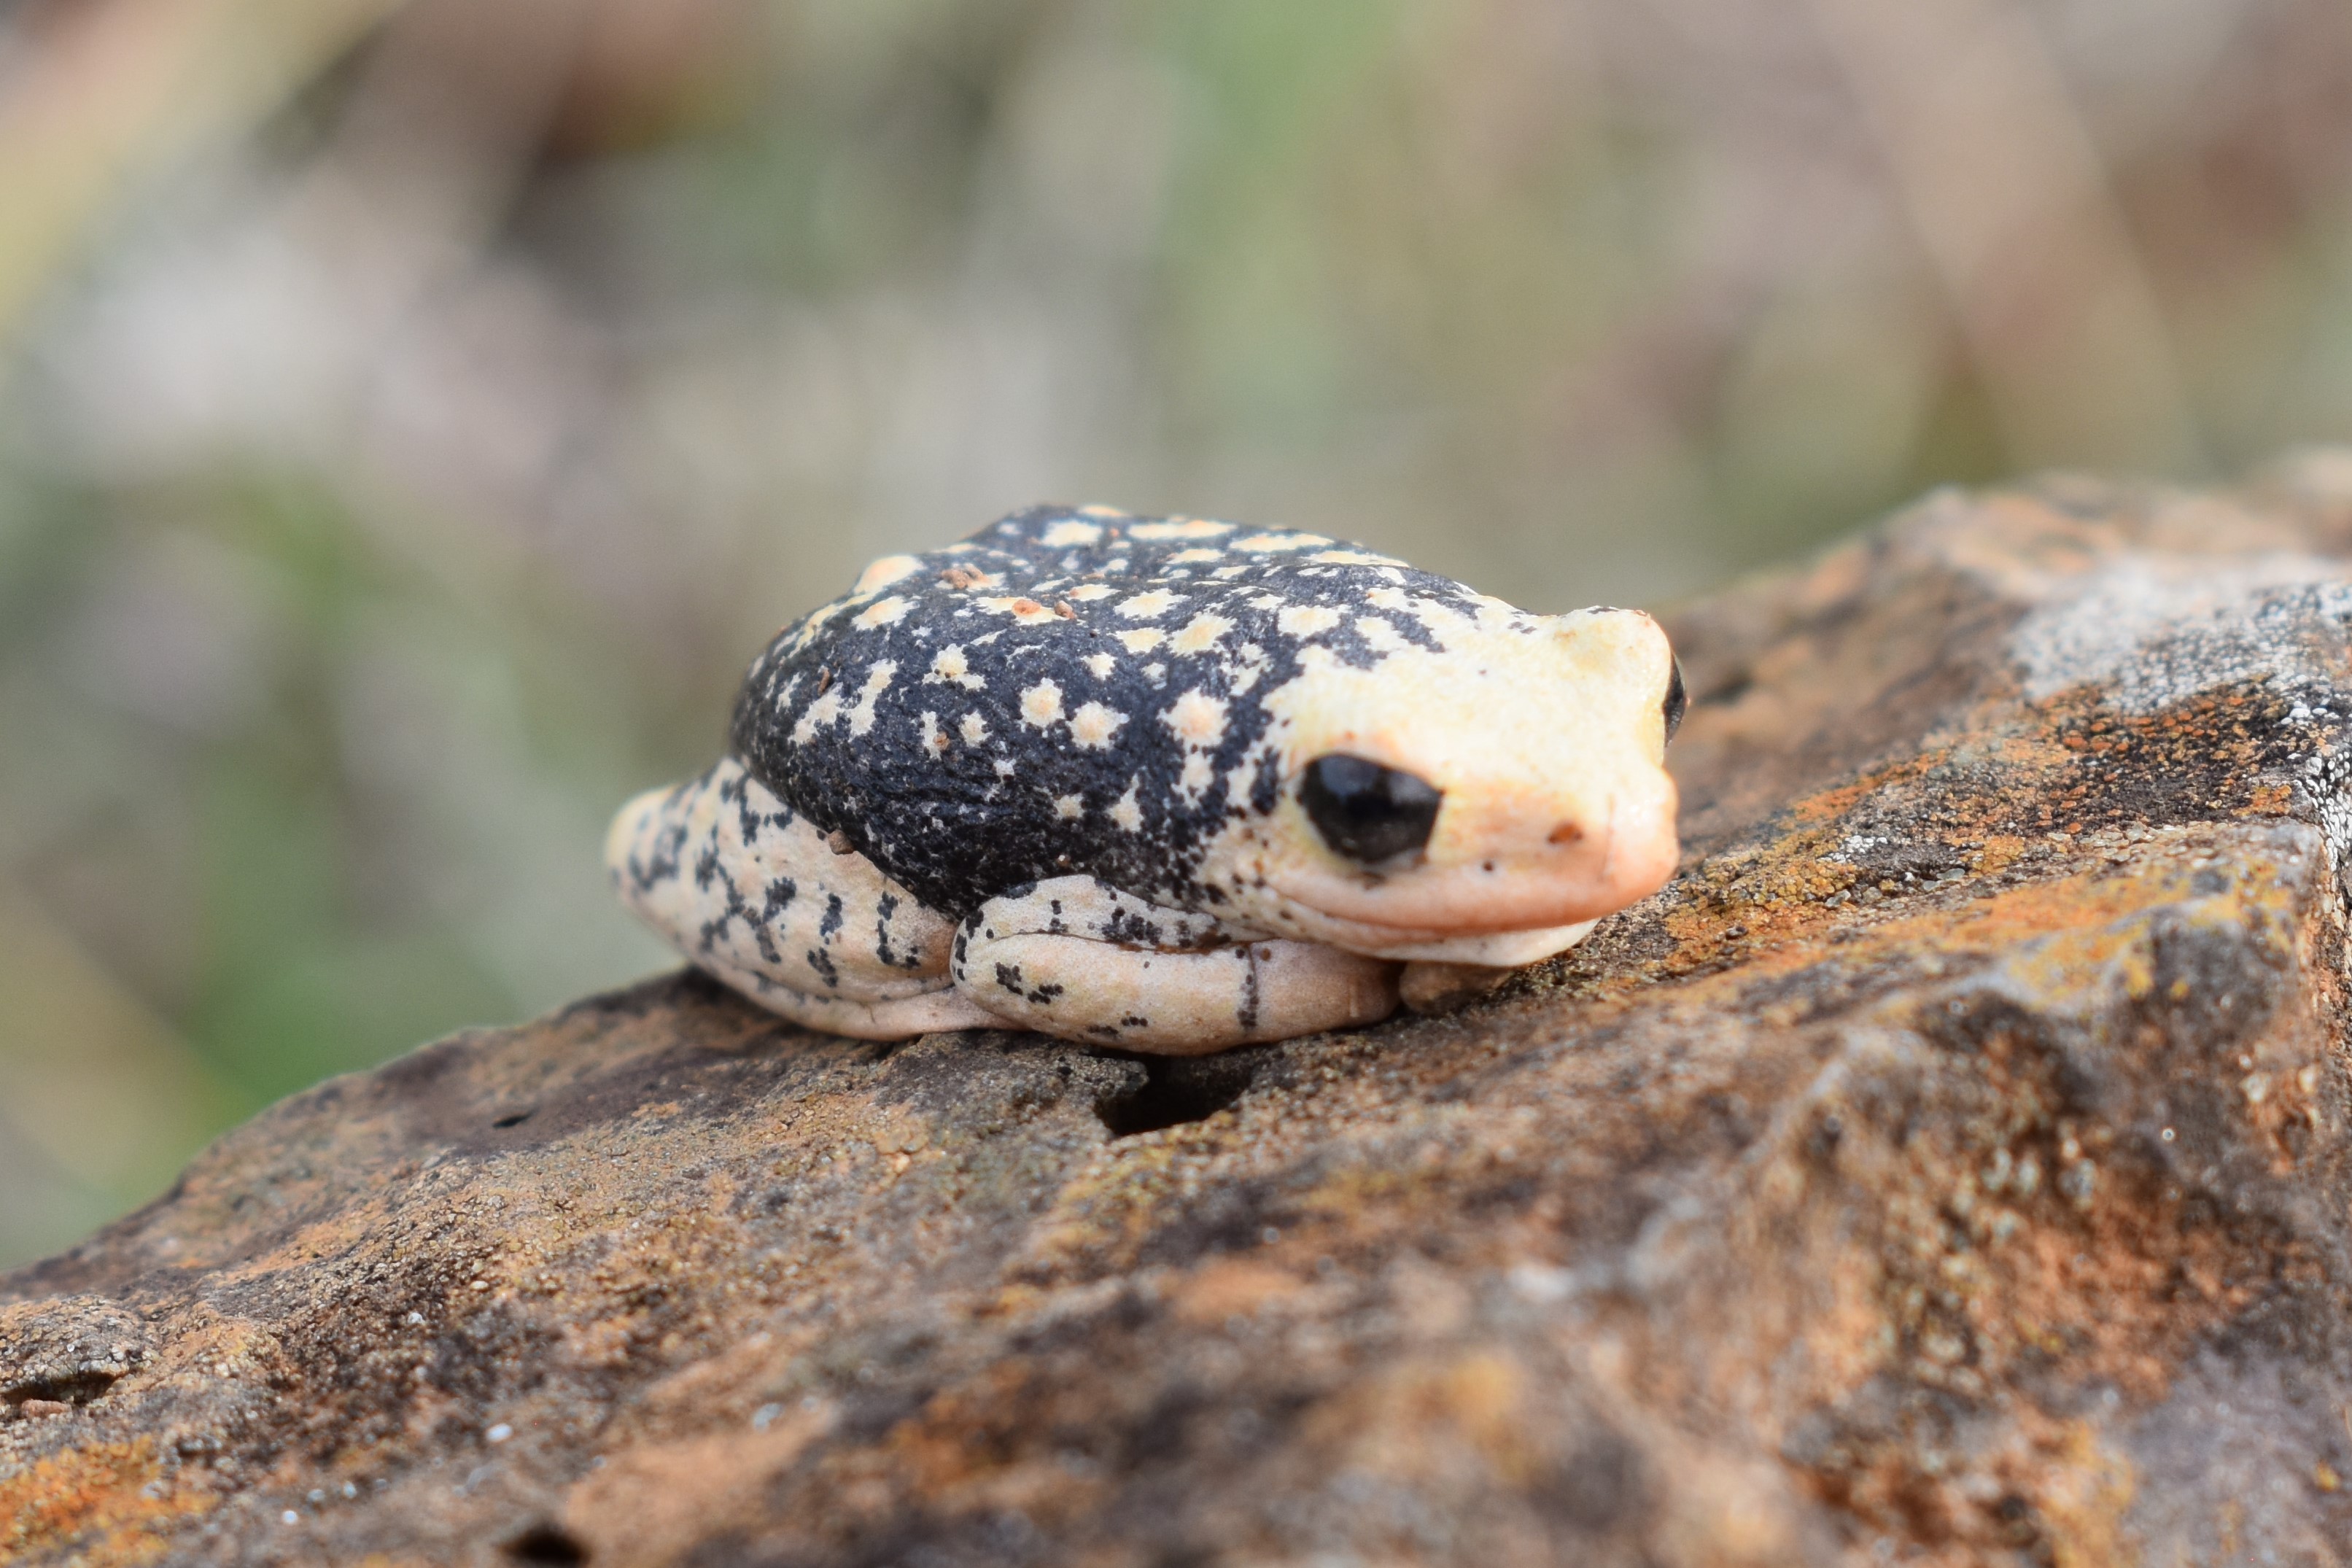 This image shows a frog sitting on a rock. The frog is yellow and black.